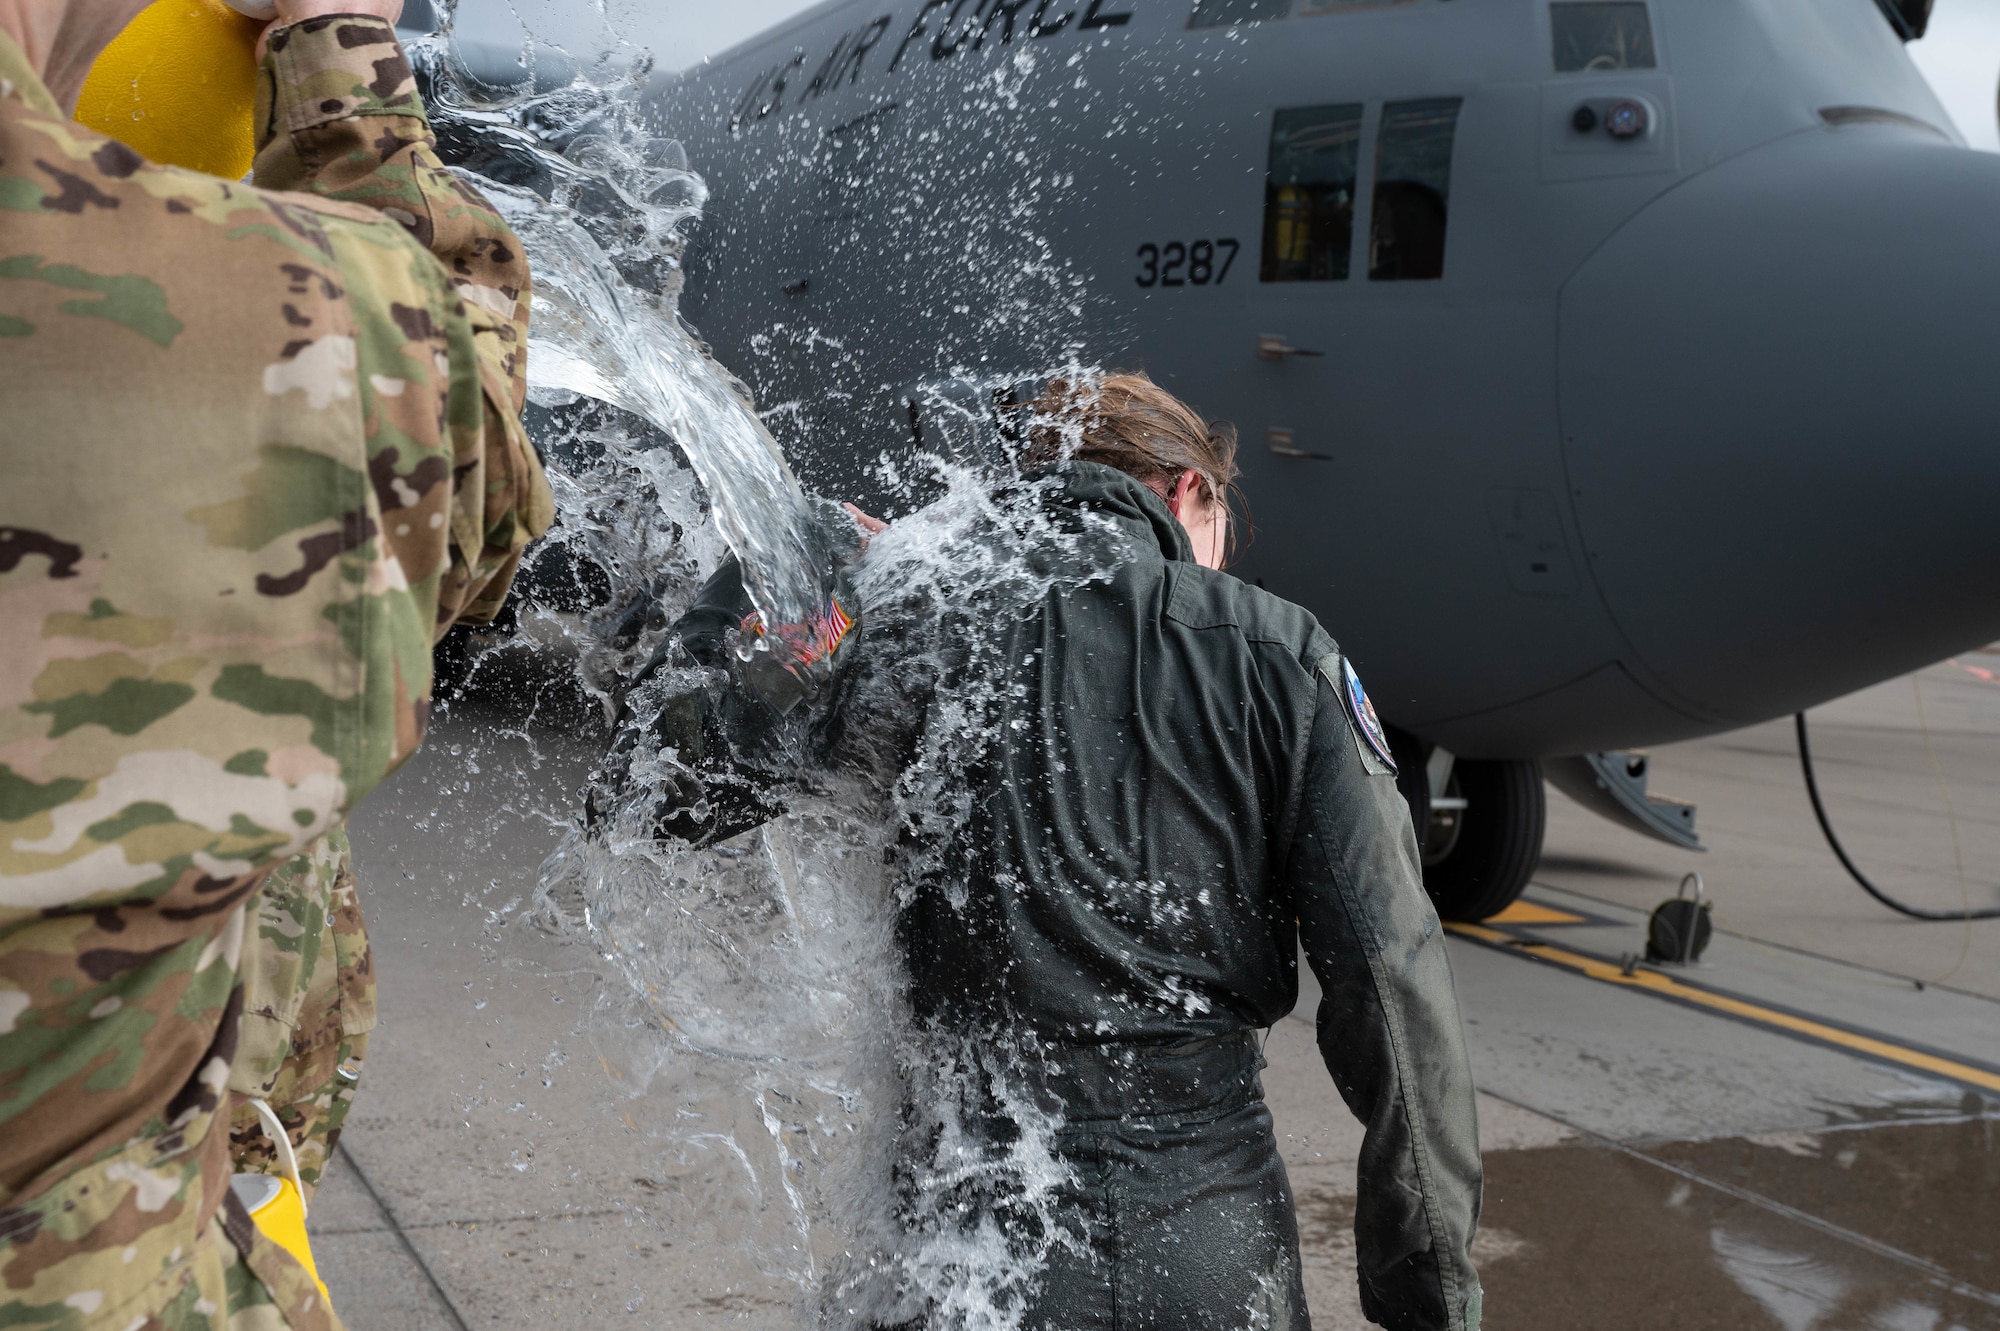 Airmen gets water thrown on them in celebration of their fini flight.